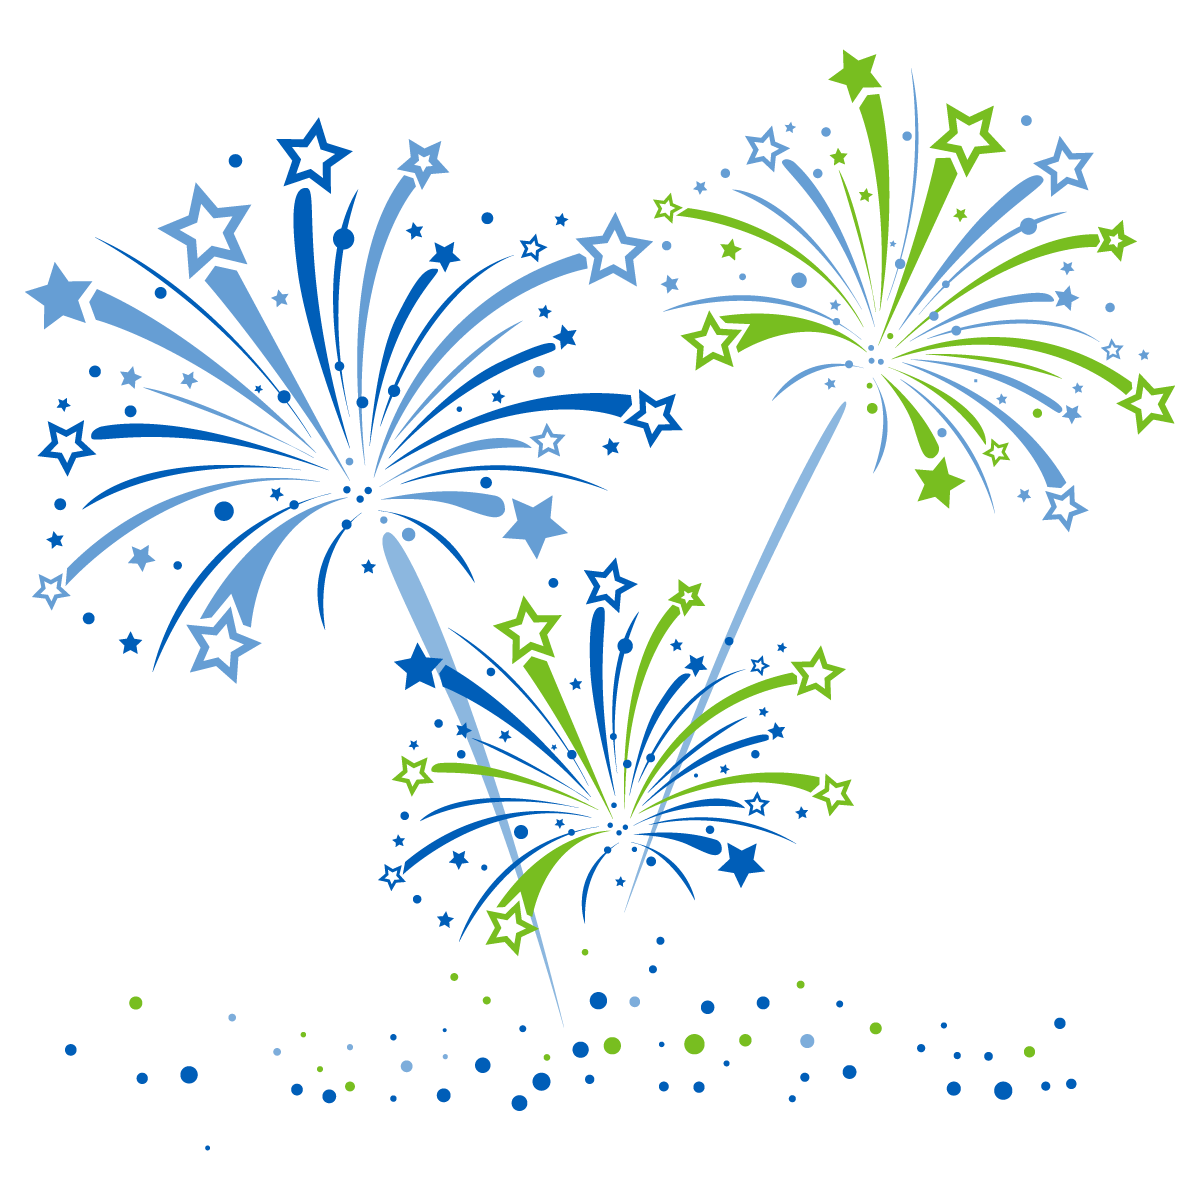 A graphic of fireworks